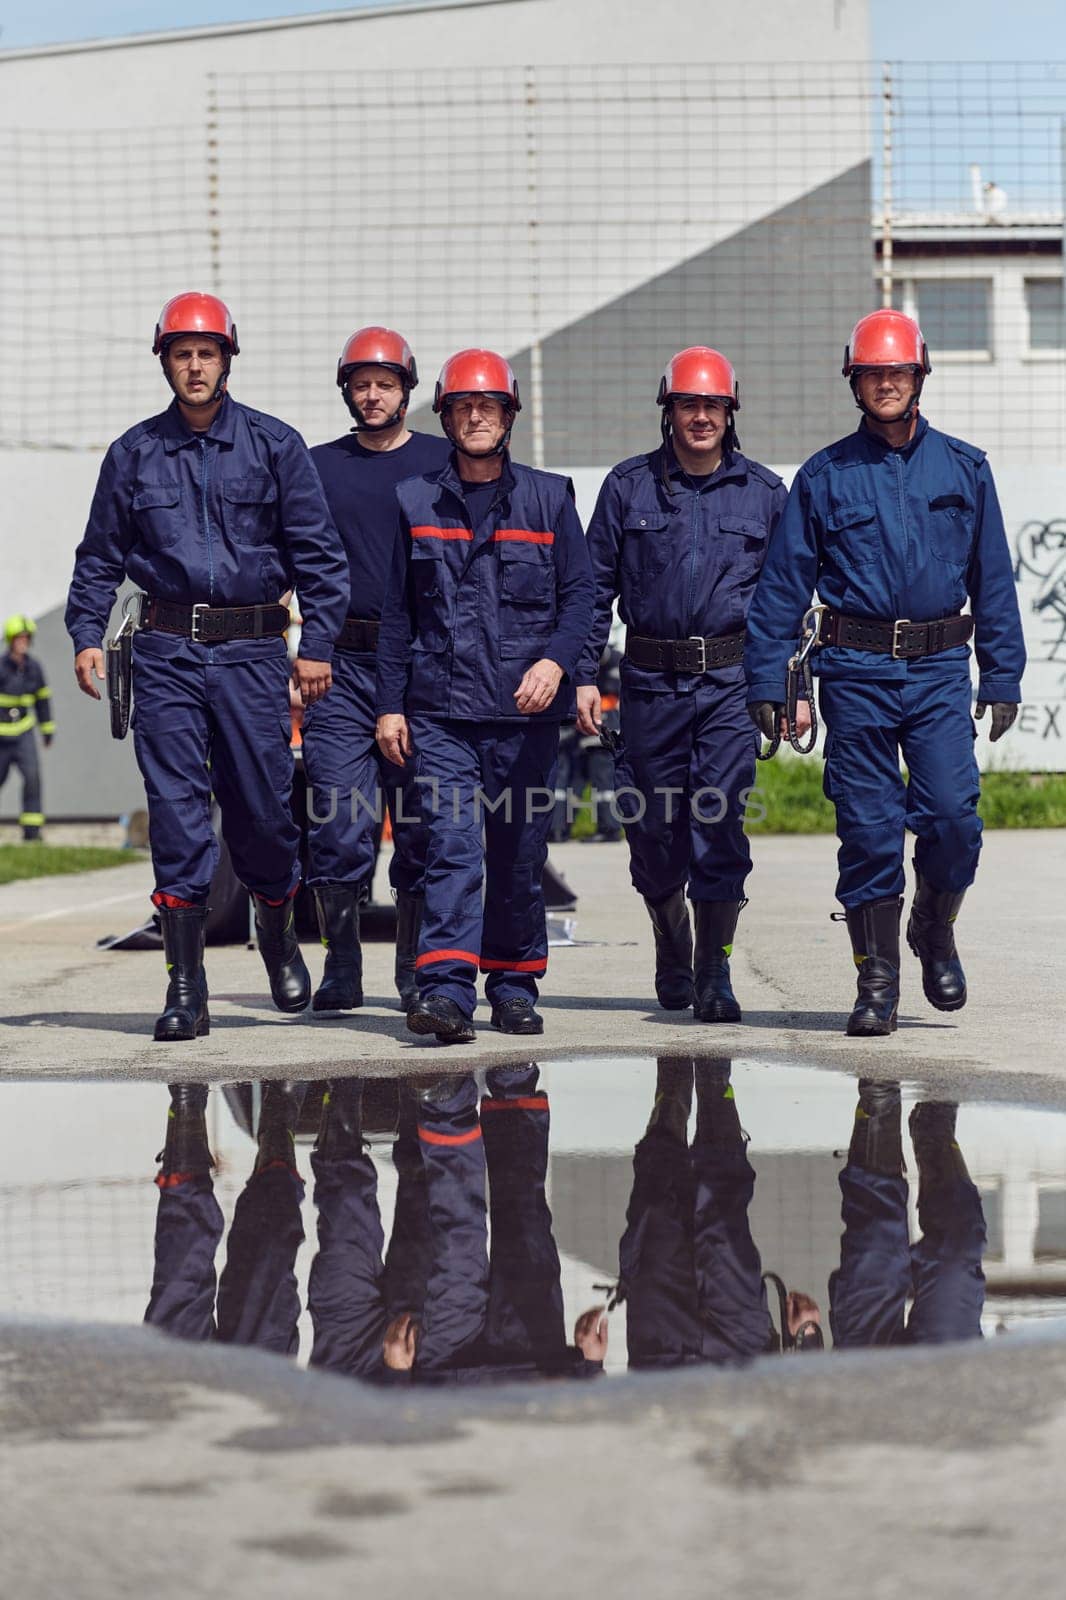 A team of confident and accomplished firefighters strides purposefully in their uniforms, exuding pride and satisfaction after successfully completing a challenging firefighting mission by dotshock